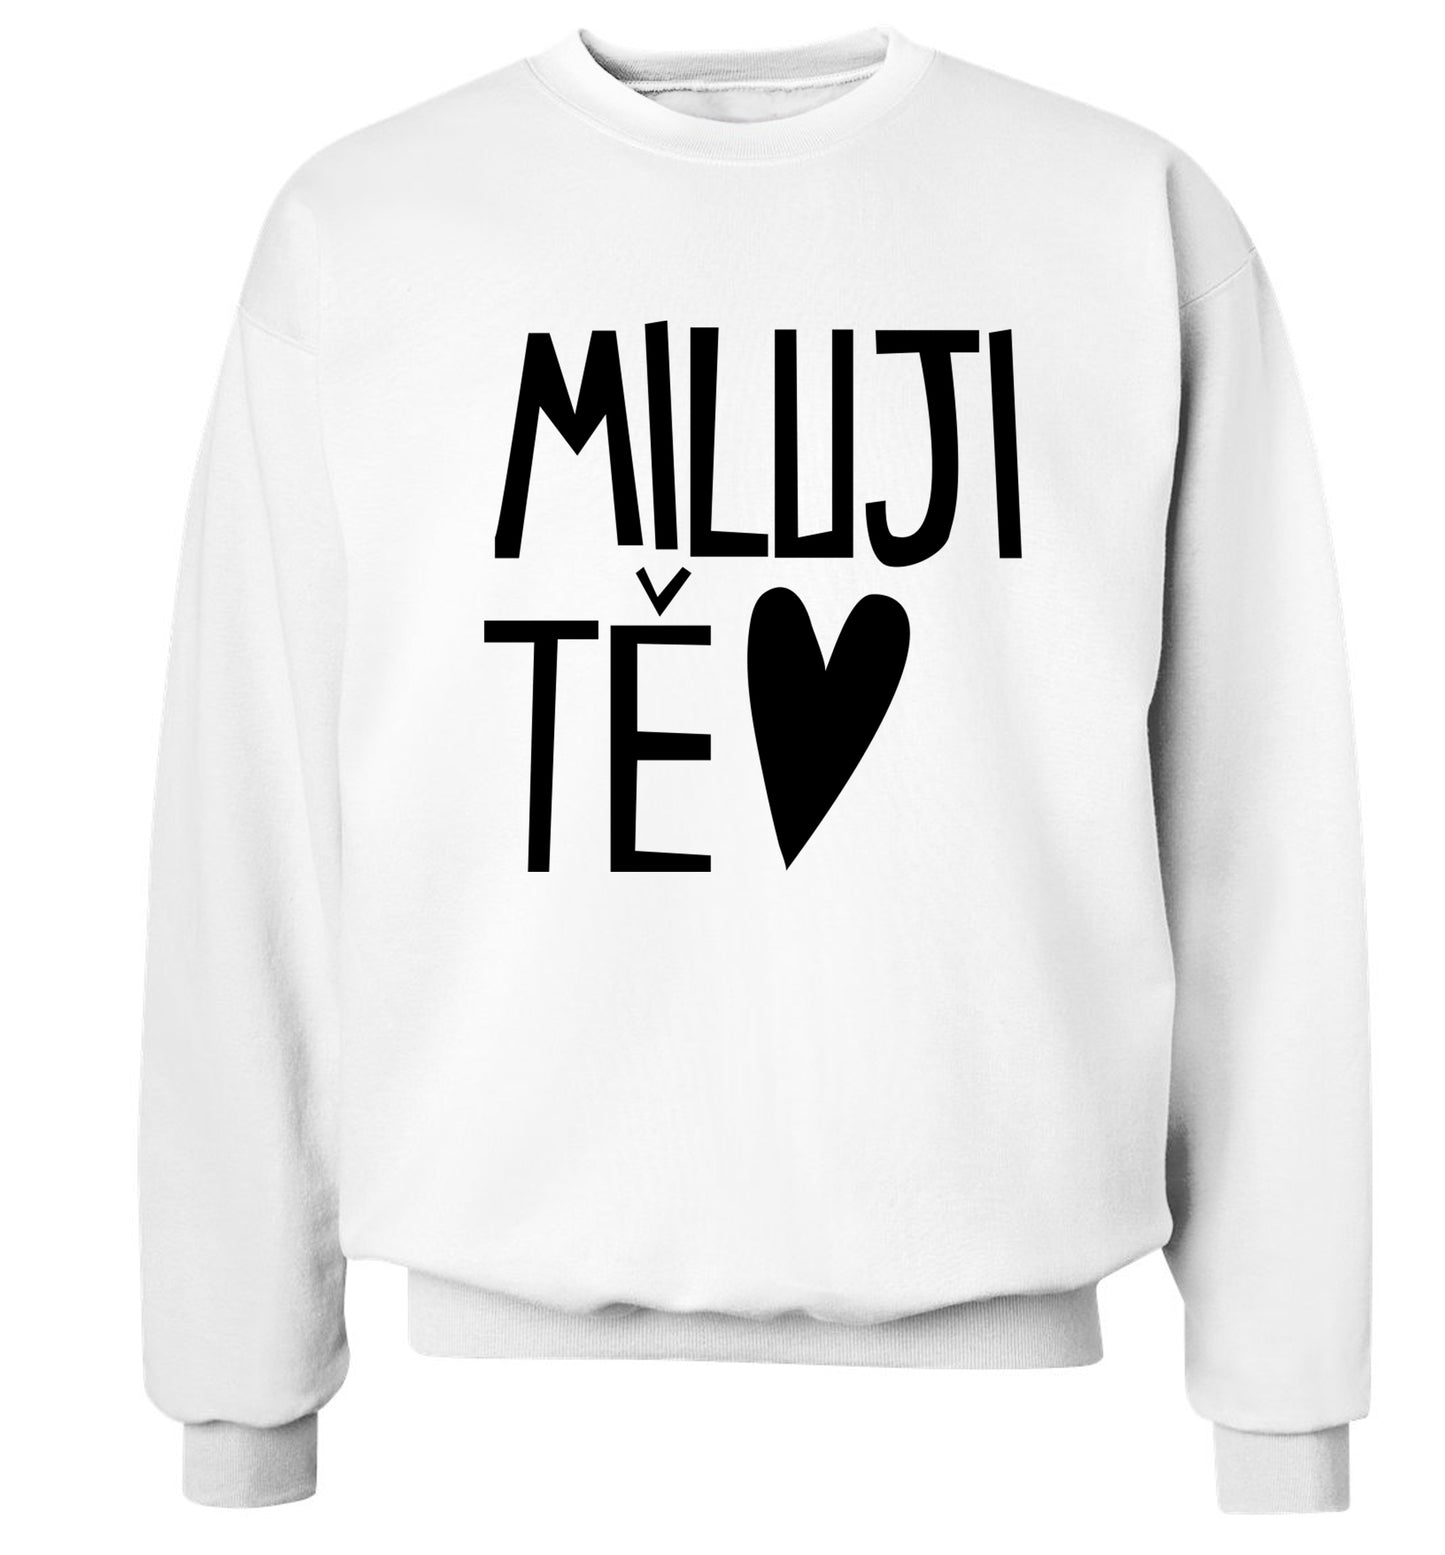 Miluji T_ - I love you Adult's unisex white Sweater 2XL